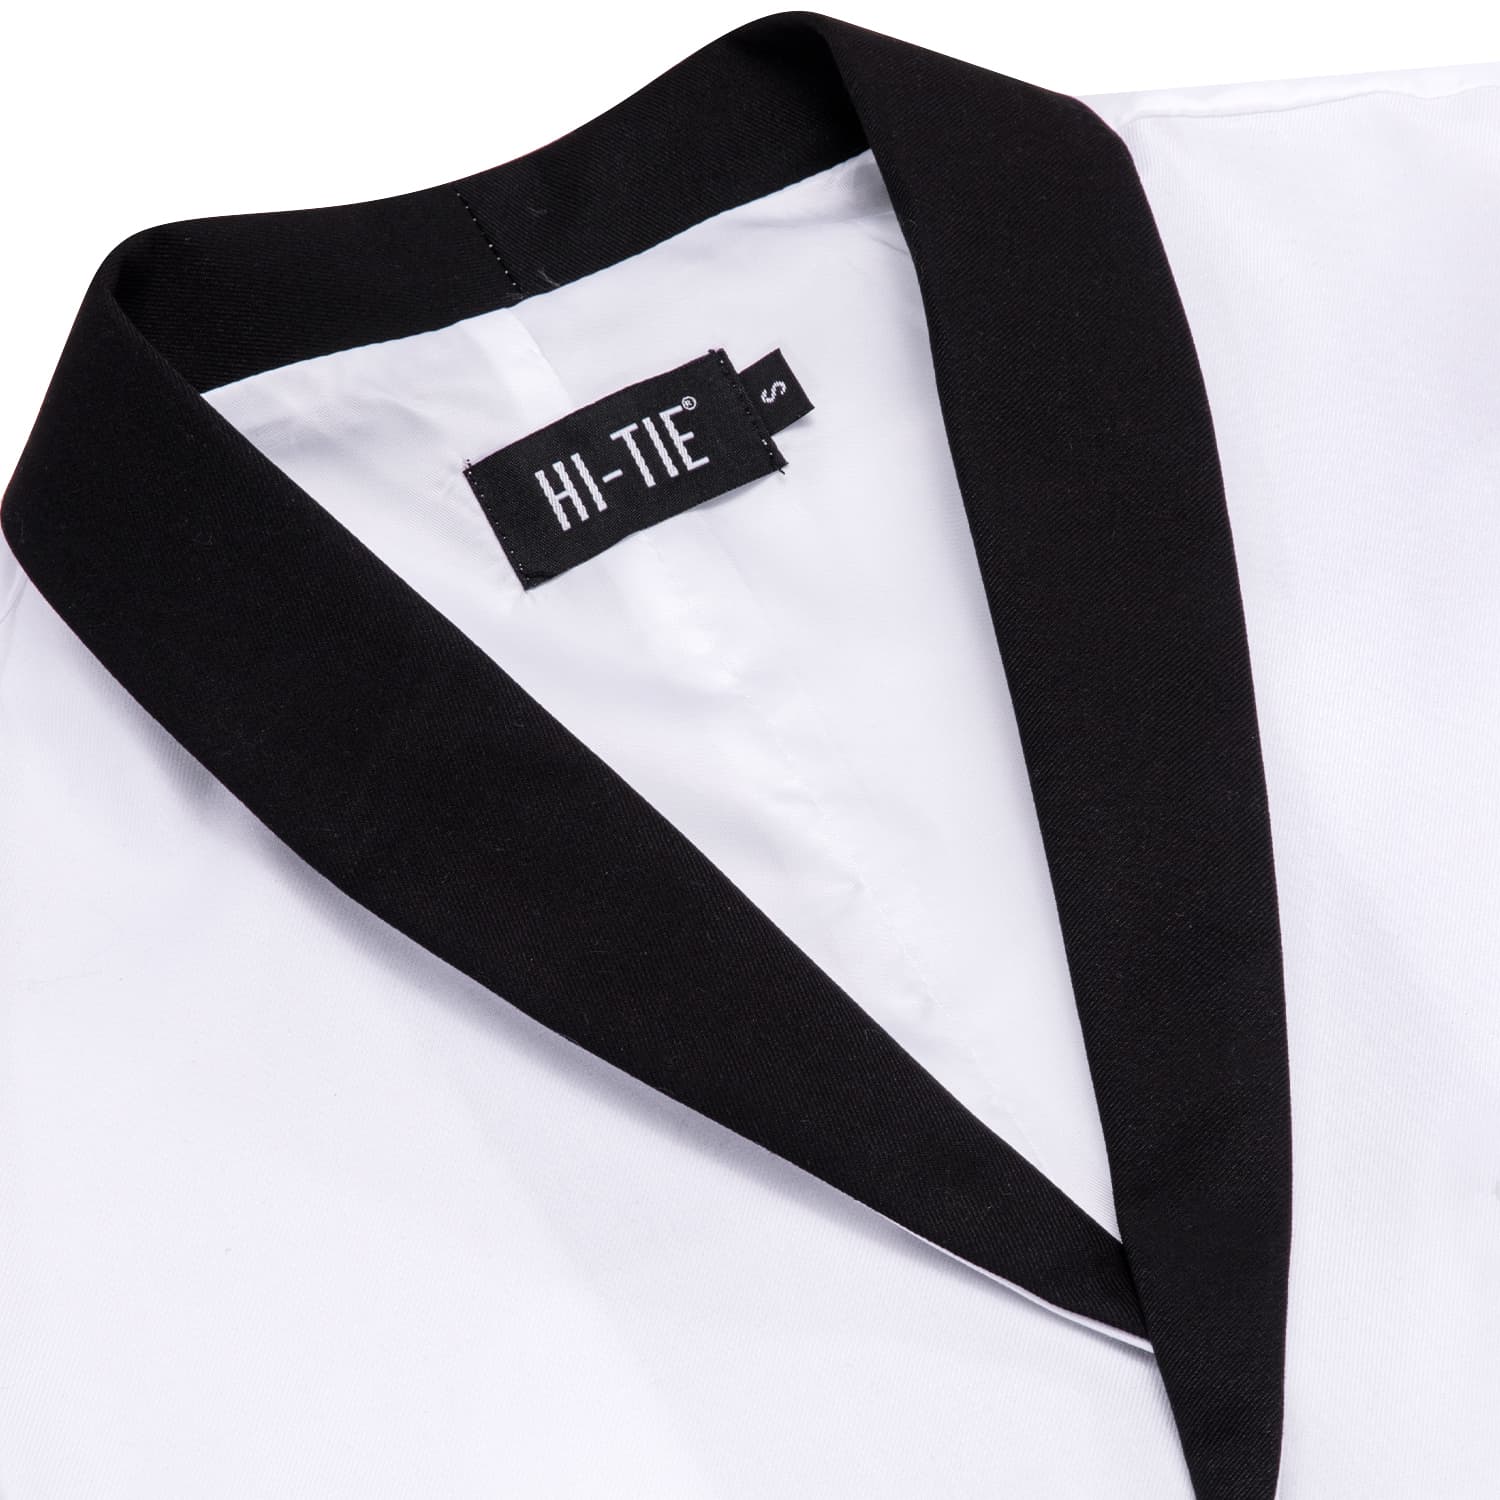  Black Shawl Collar White Solid Waistcoat Formal Vests for Business